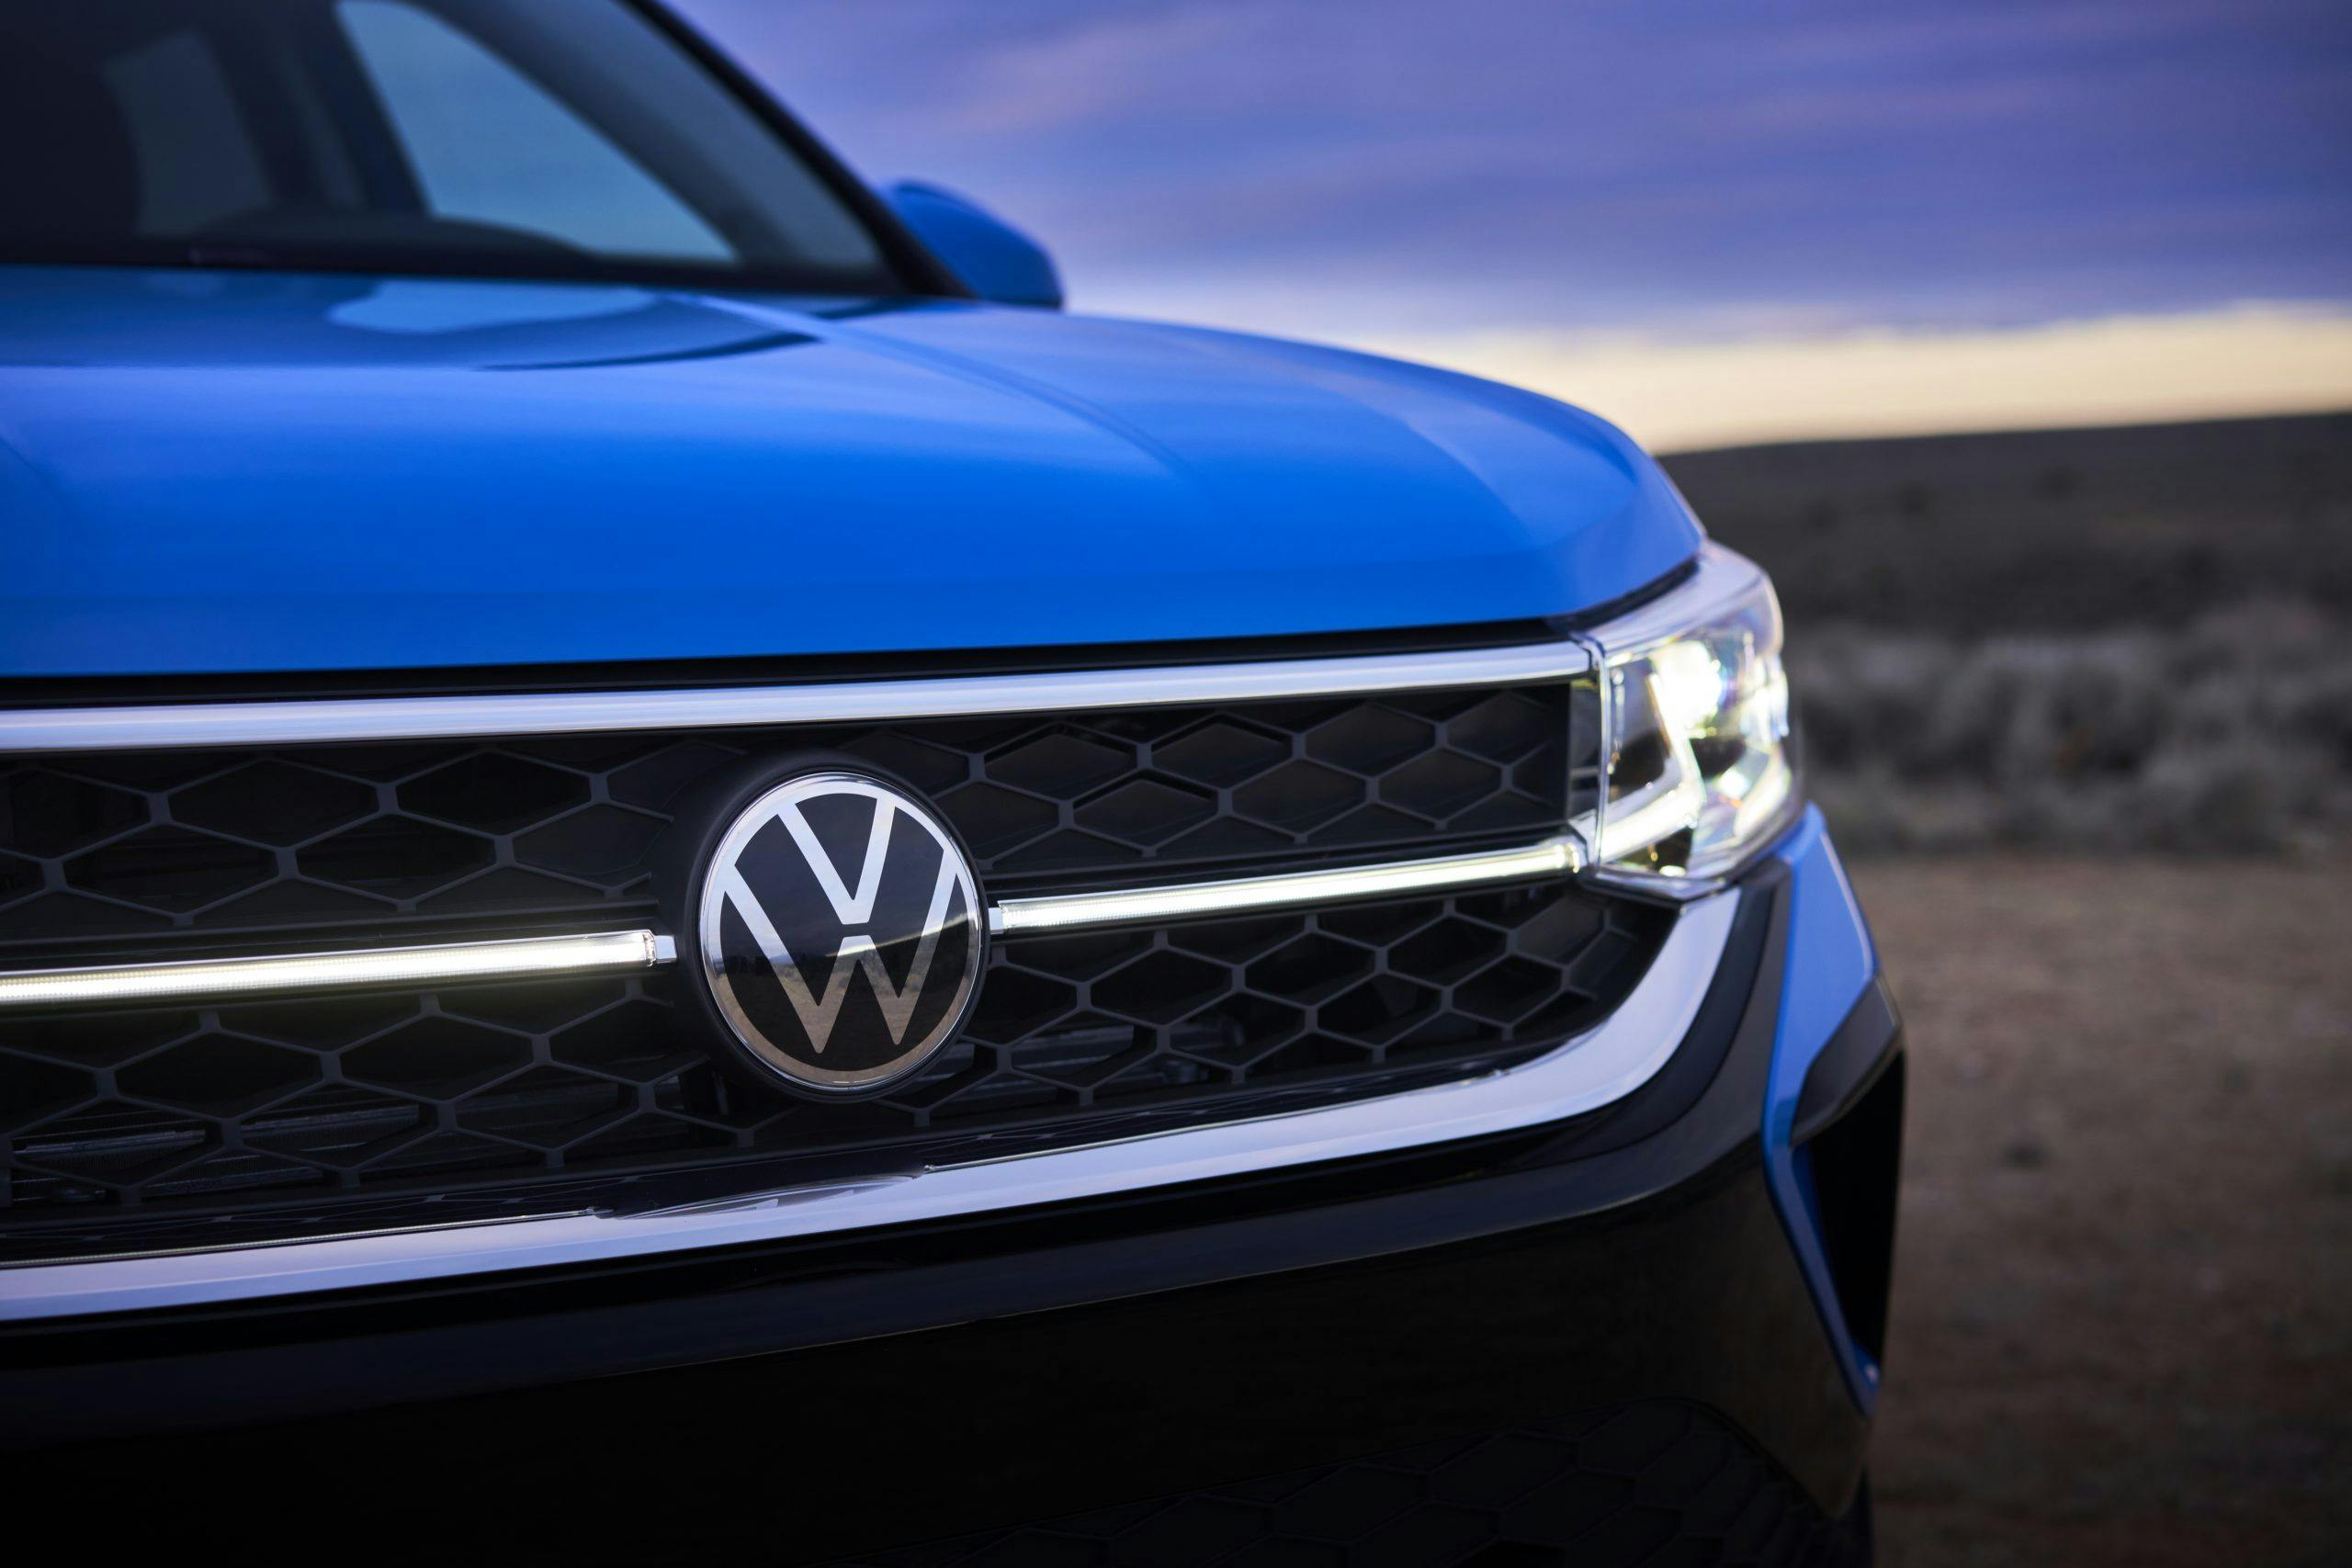 2022 Volkswagen Taos front logo and head lamp